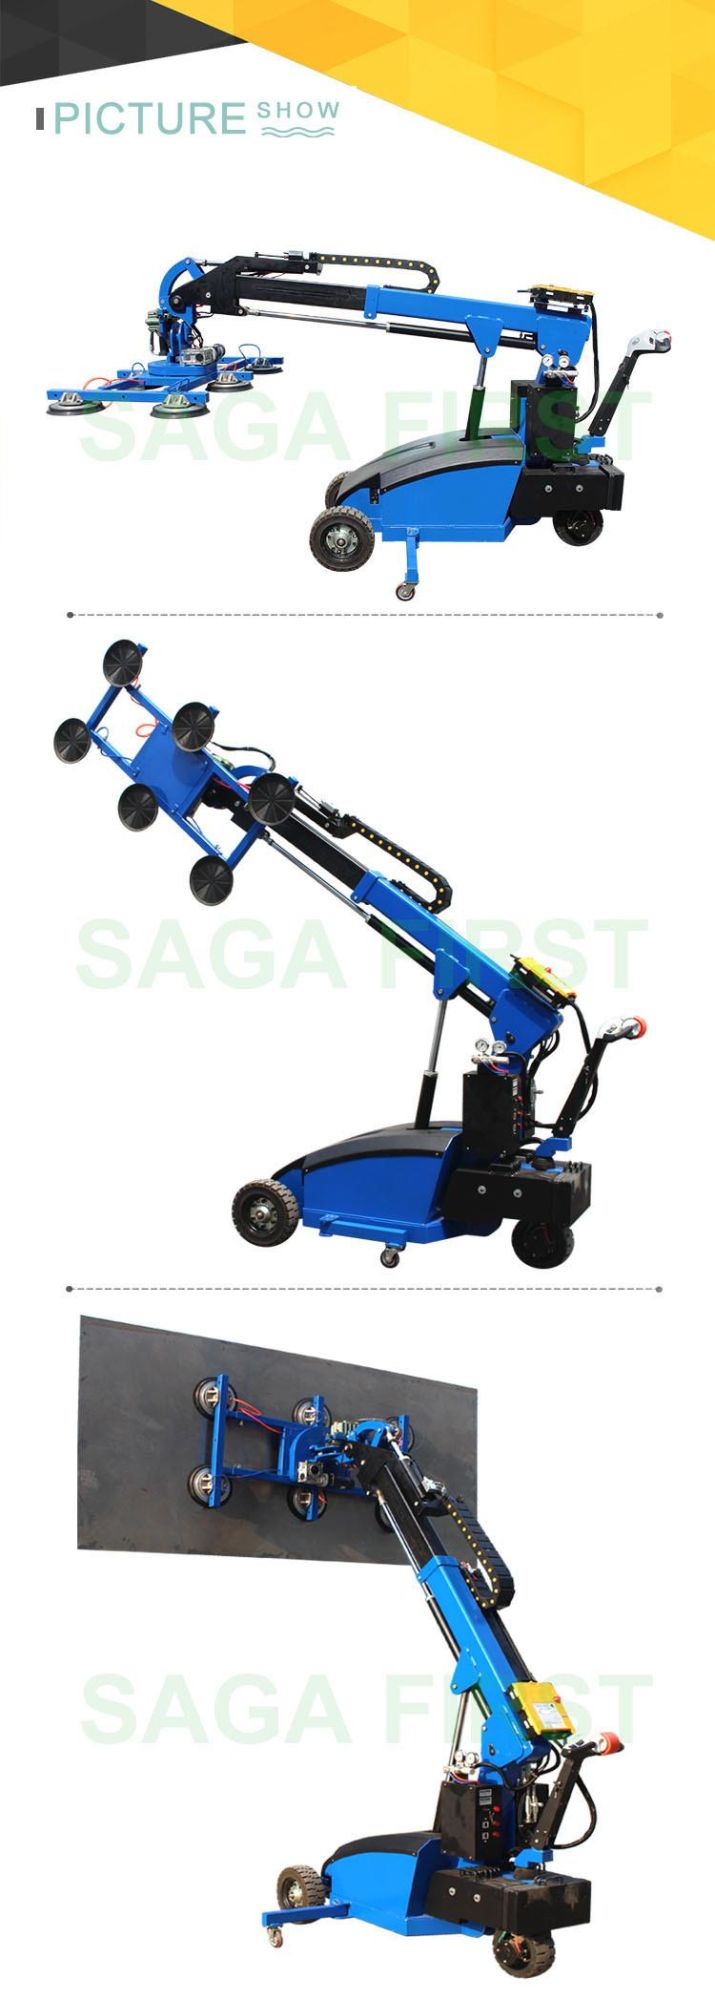 Sagafirst 800kg 600kg Suction Vacuum Glass Lifter for Metal Sheet Marble